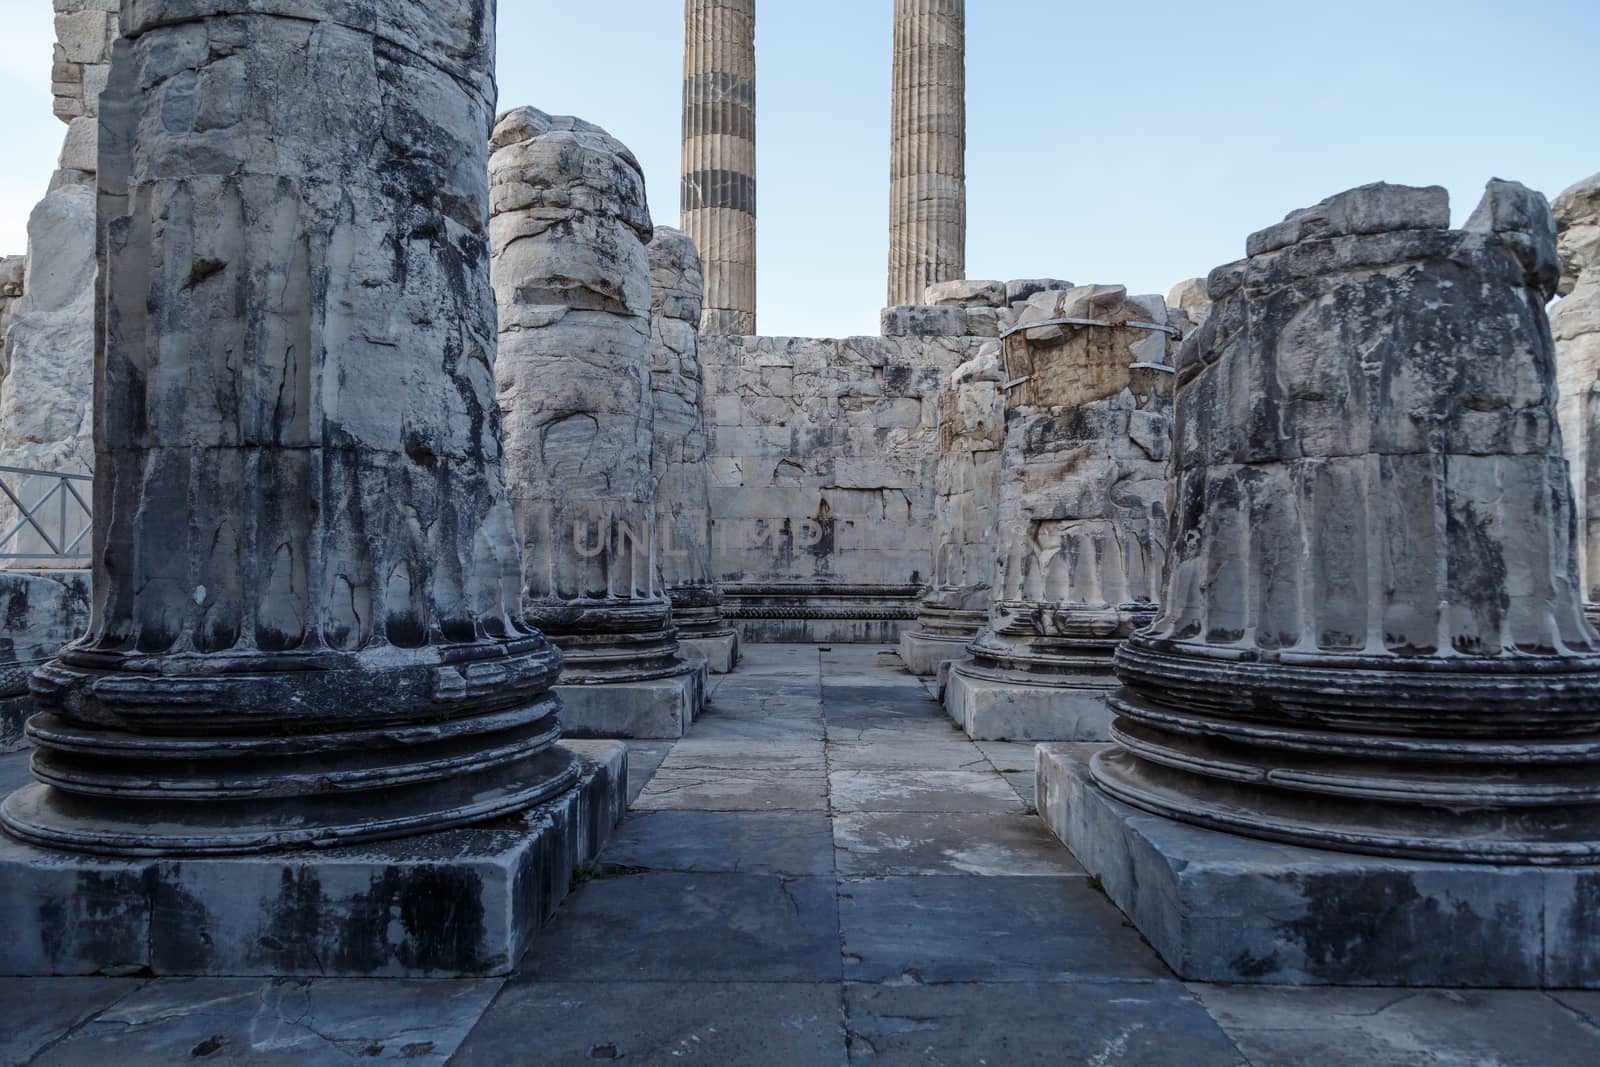 View of Didyma Ancient City in Aydın, Turkey, with granit columns and temple, on blue sky background.